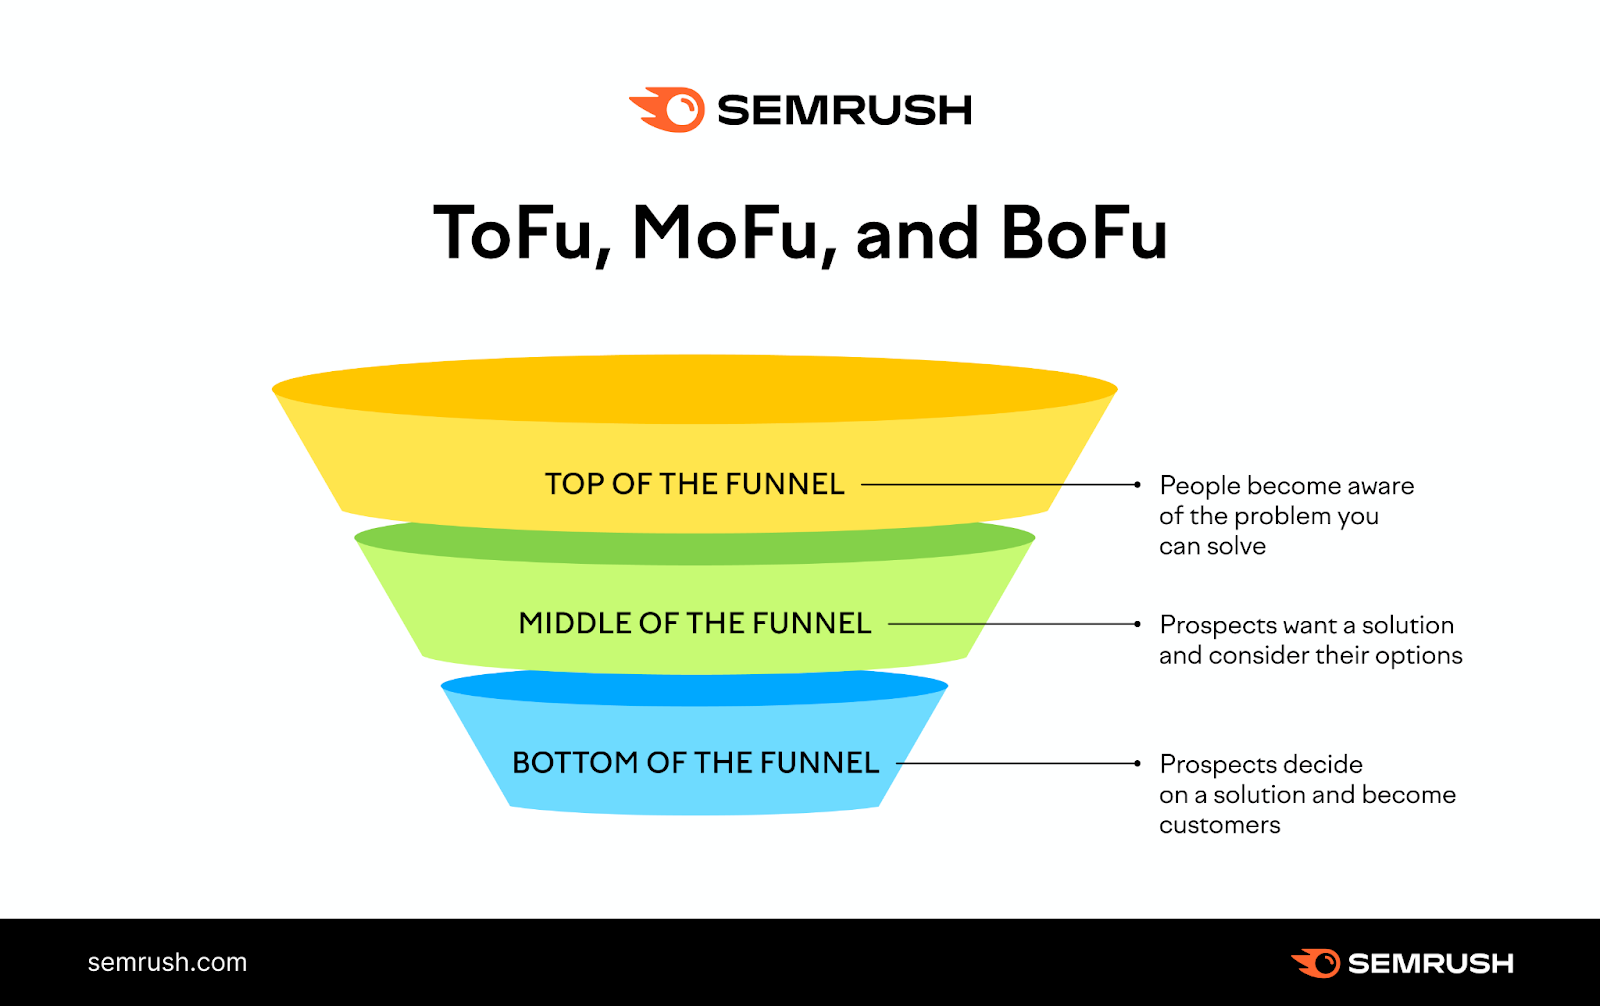 B2B content marketing funnel showing top of the funnel, middle of the funnel, and bottom of the funnel